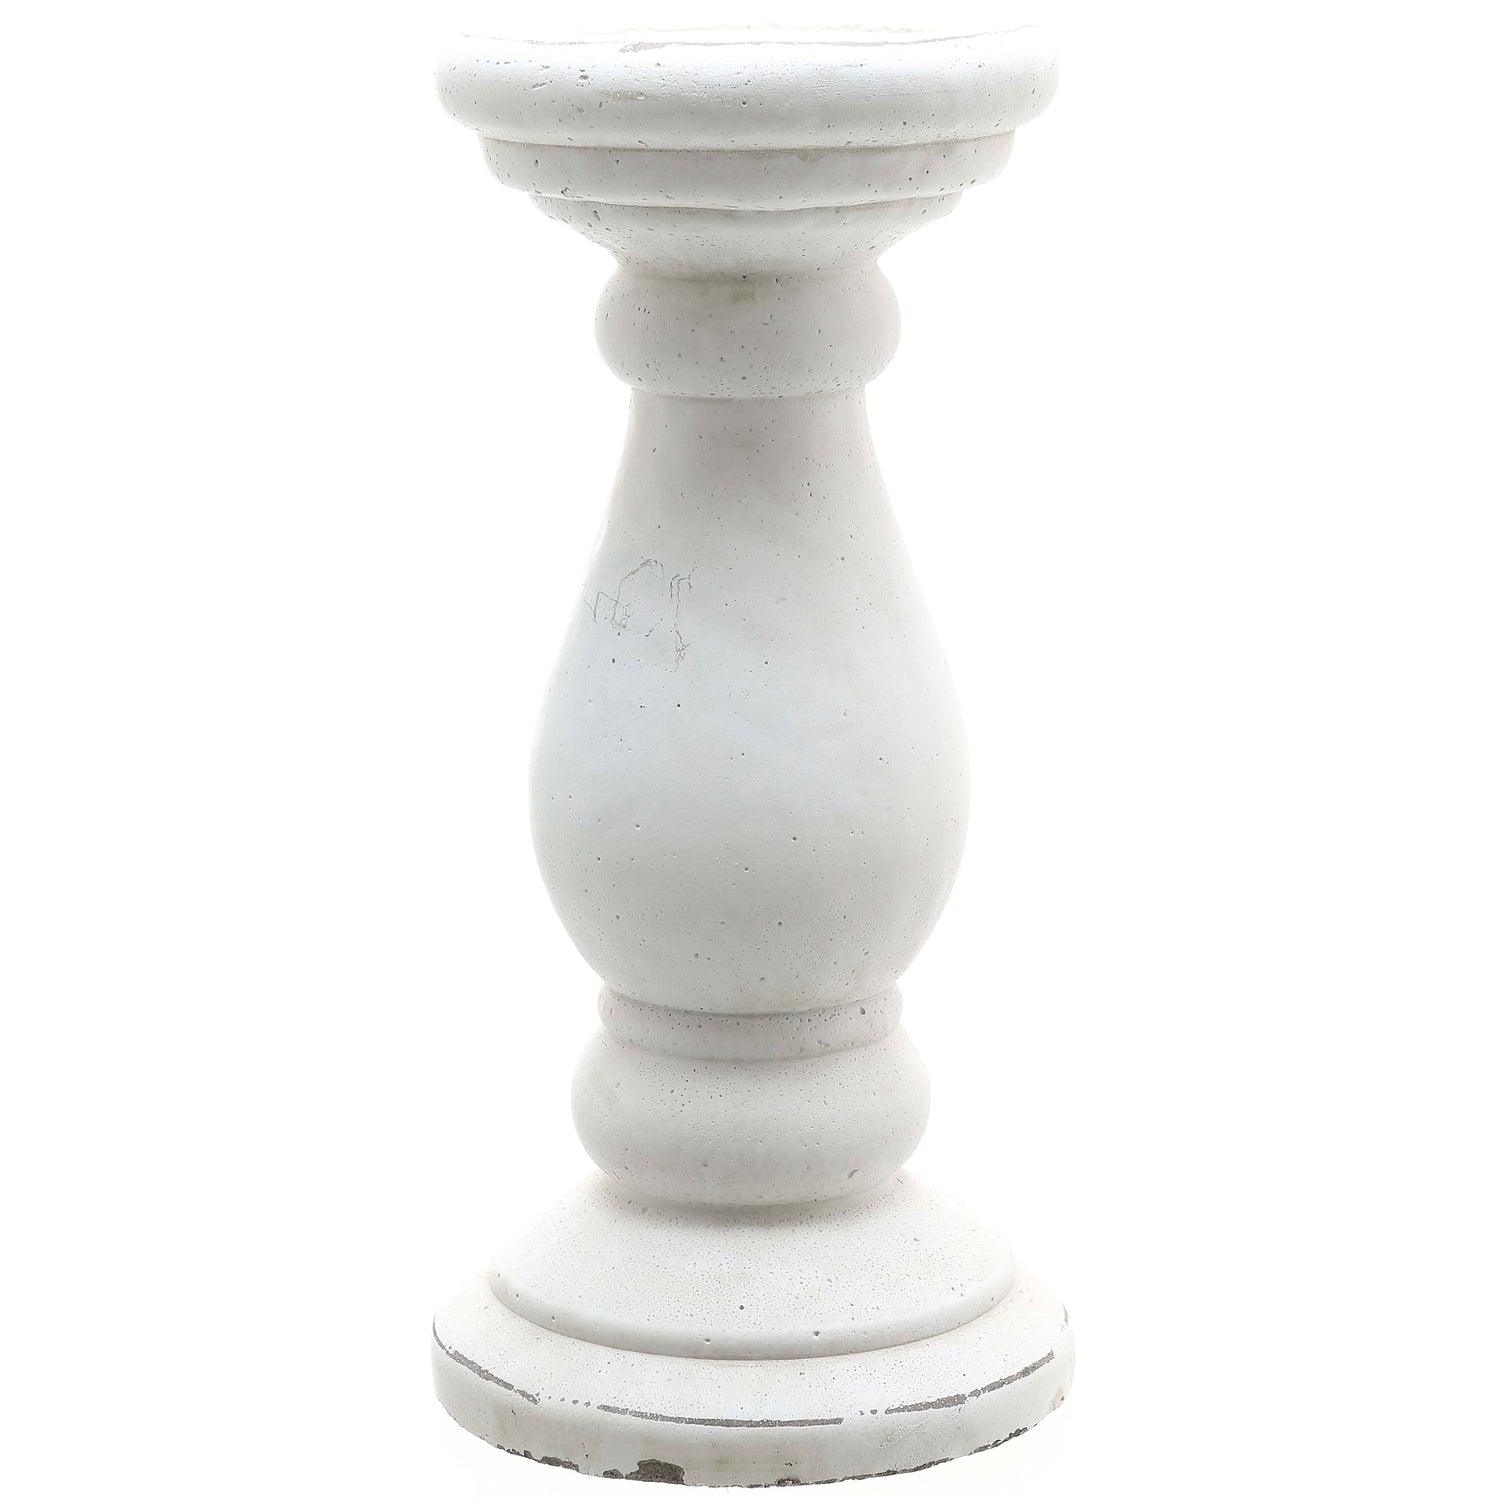 Small Matt White Ceramic Candle Holder - £24.95 - Gifts & Accessories > Candle Holders > Ornaments 